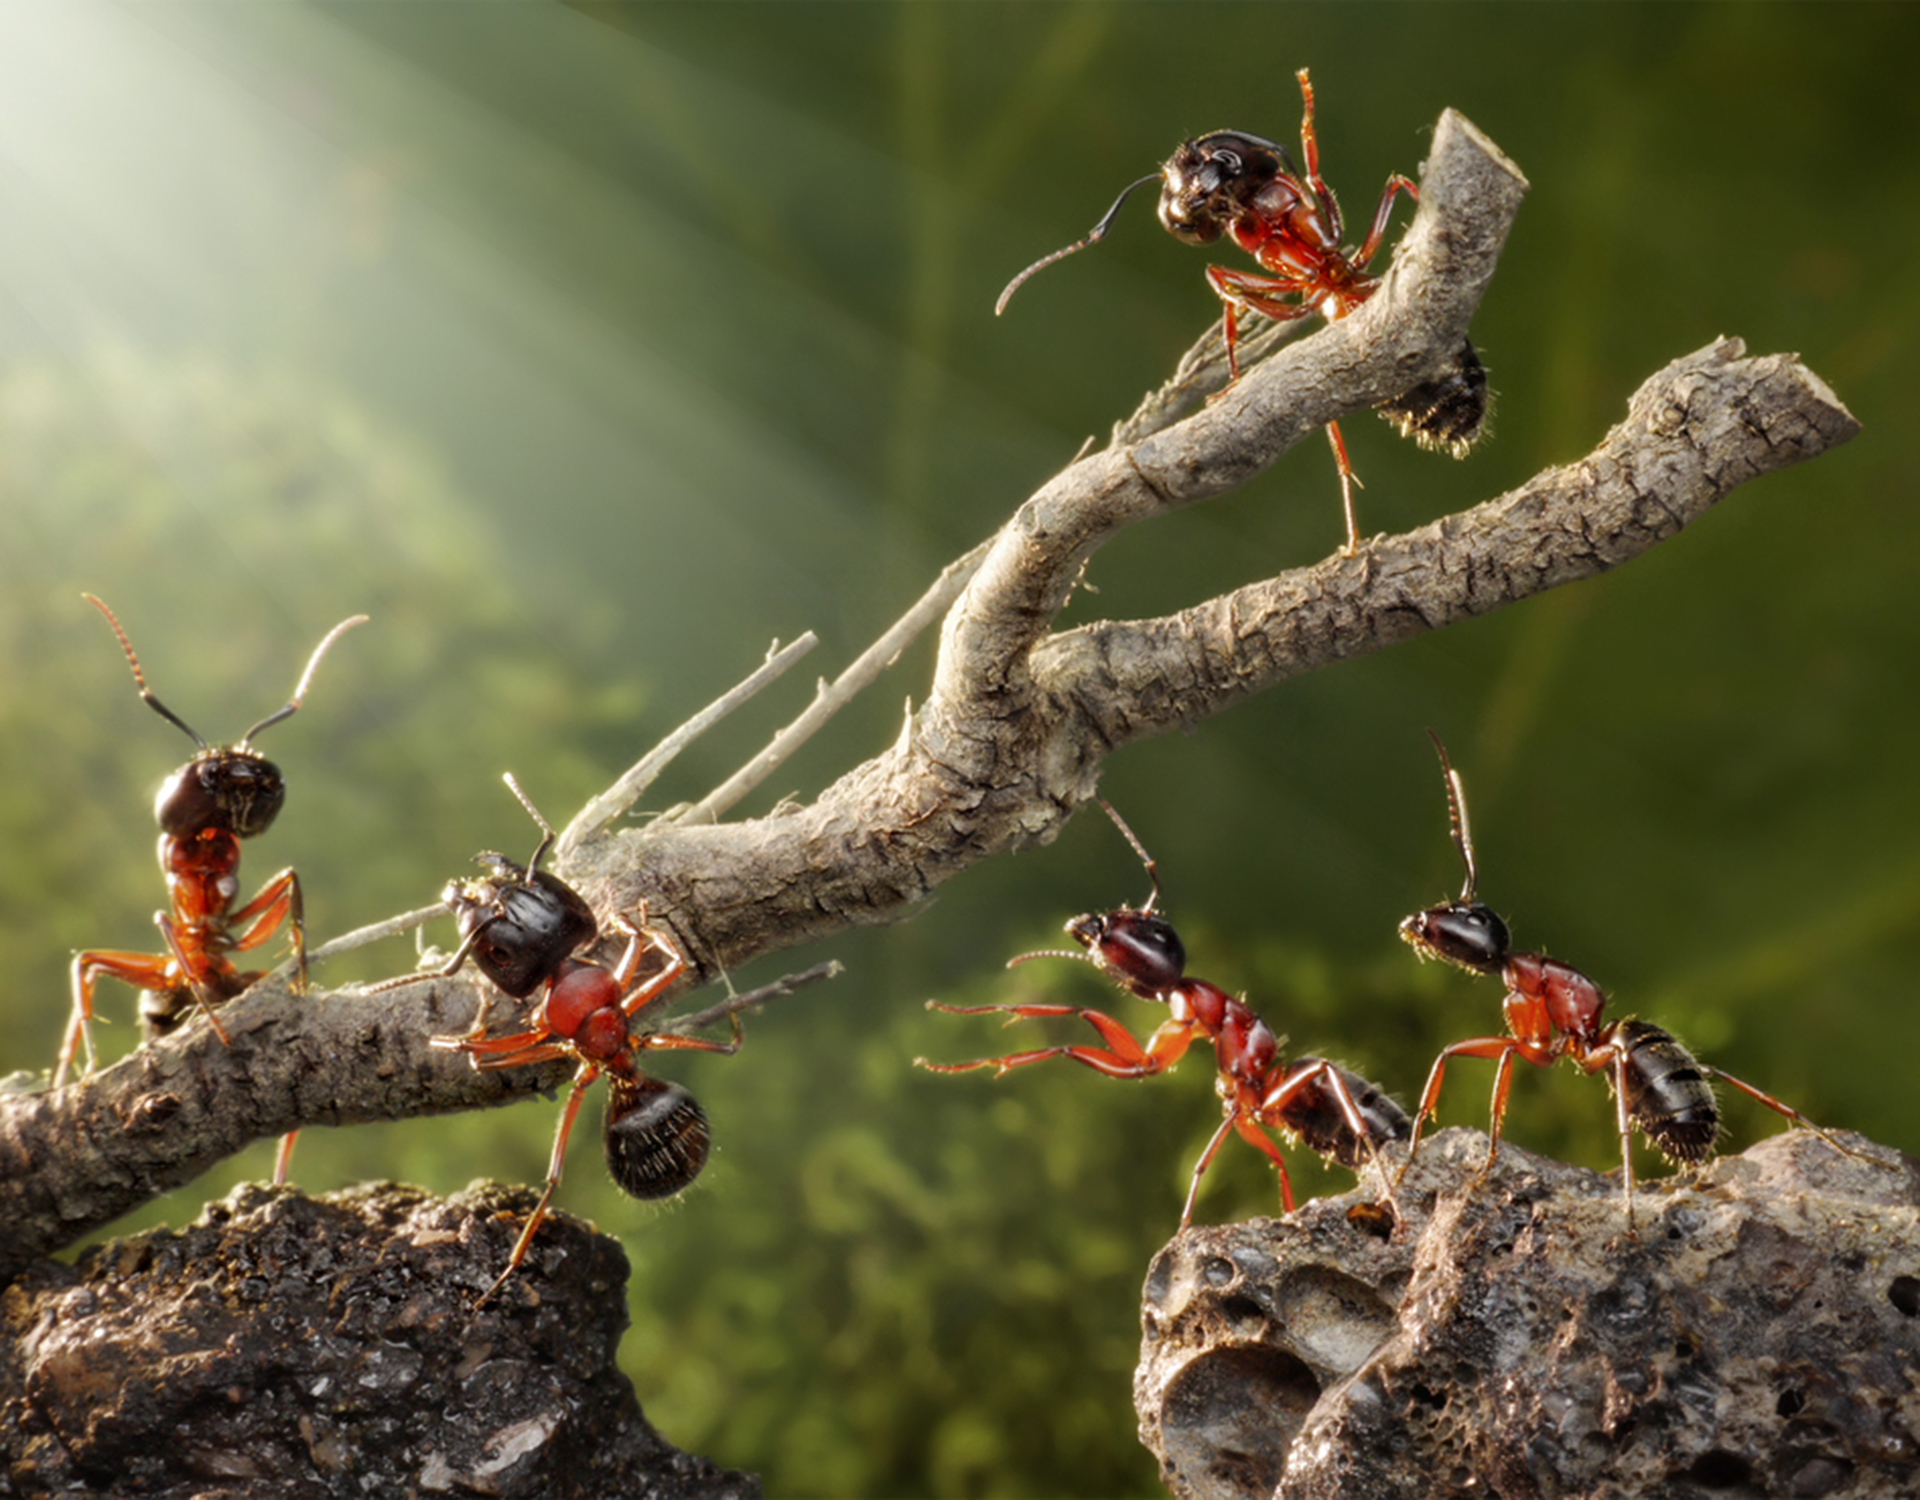 A close-up of a group of ants moving a twig over a rocky surface